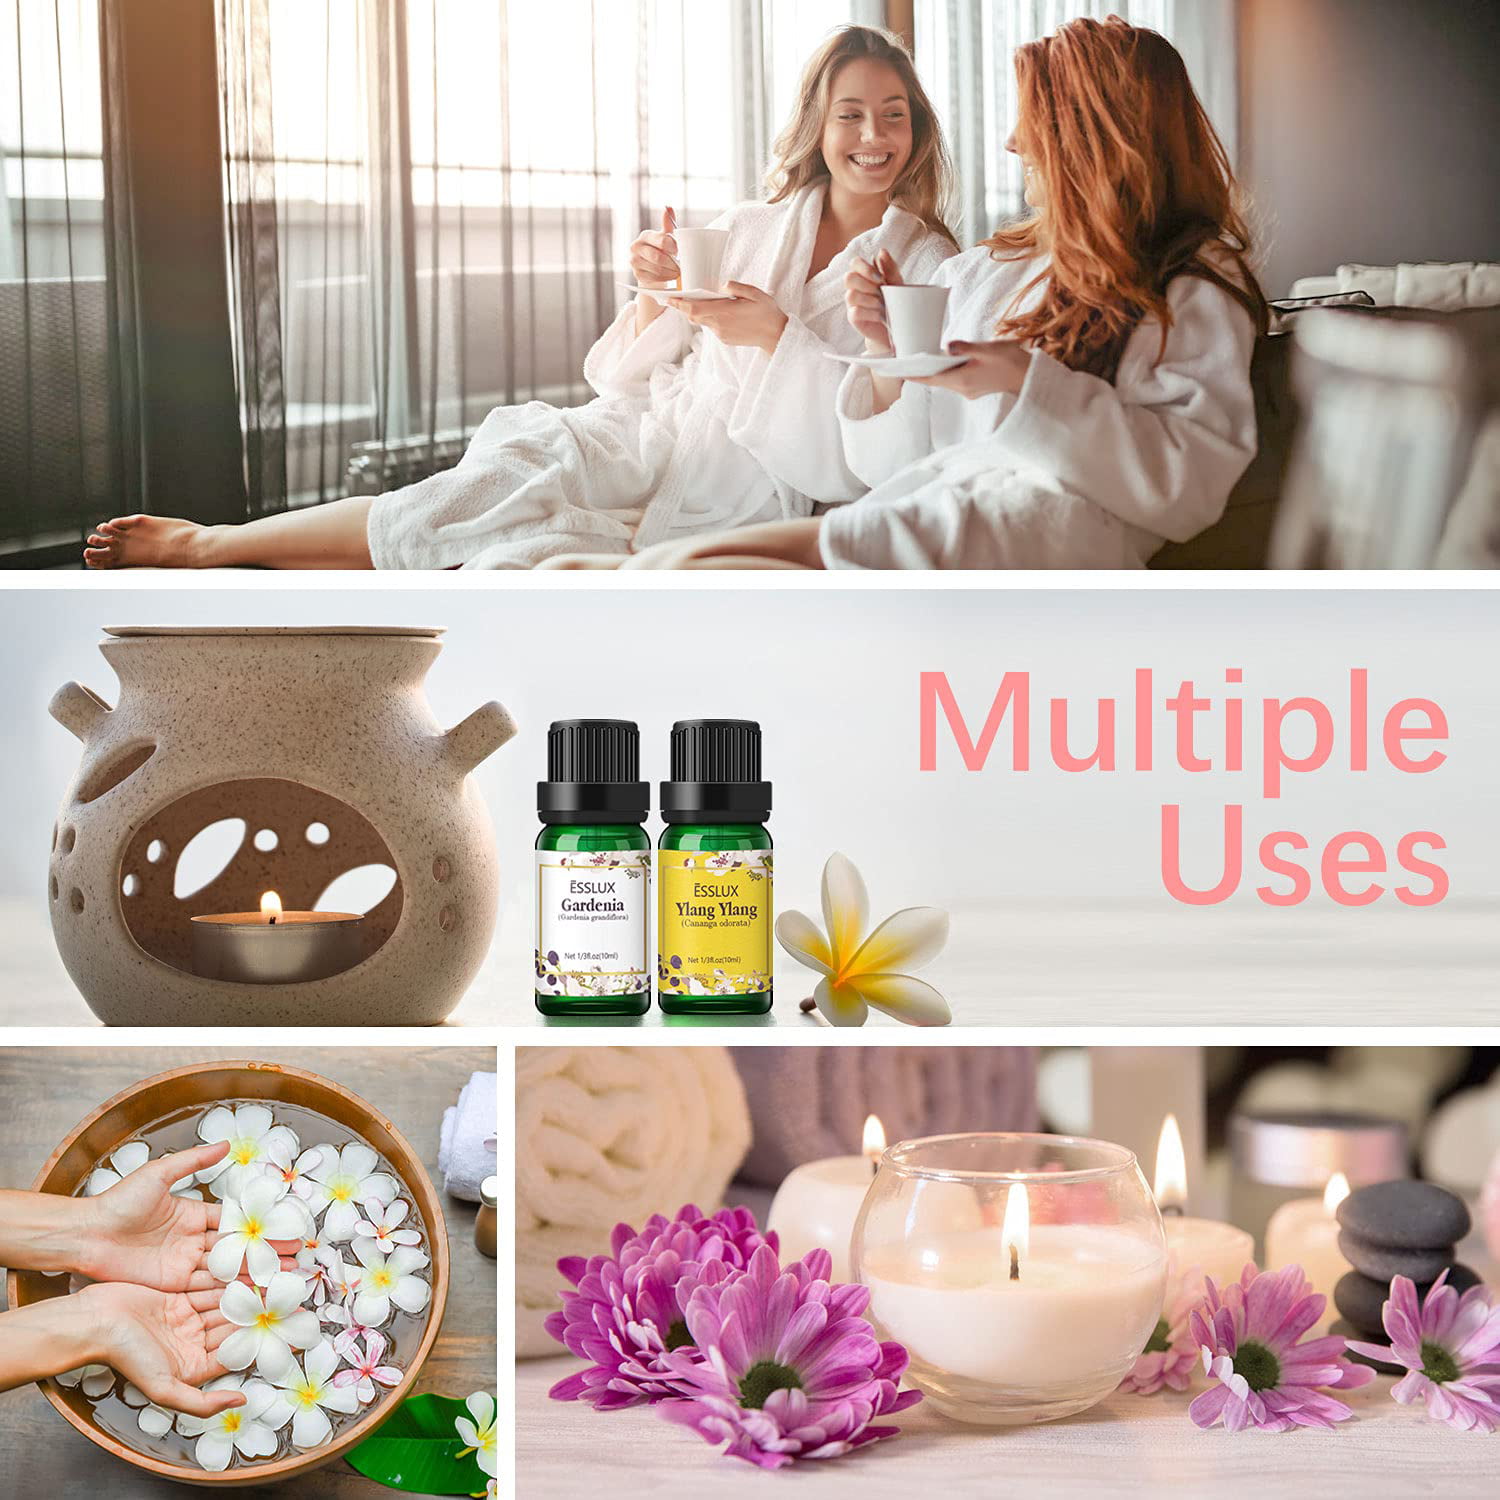 Essential Oils Set, Esslux Floral Collection with Ylang Ylang, Jasmine, Gardenia, Rose, Cherry Blossom, White Tea Essential Oils, Perfect for Diffuser